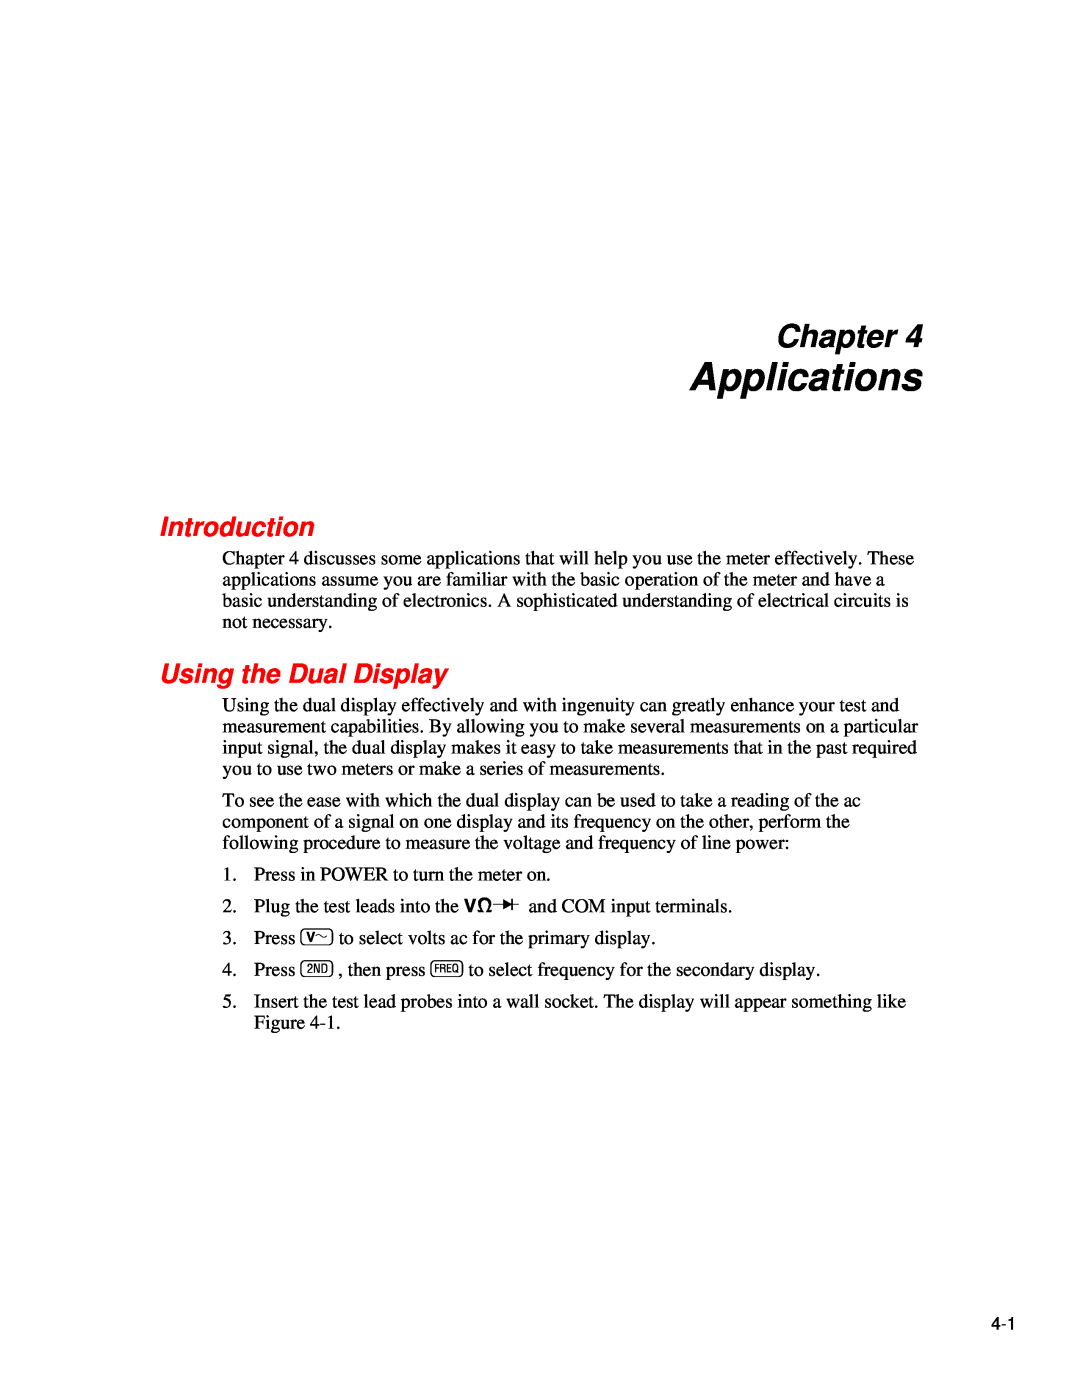 Fluke 45 user manual Applications, Using the Dual Display, Chapter, Introduction 